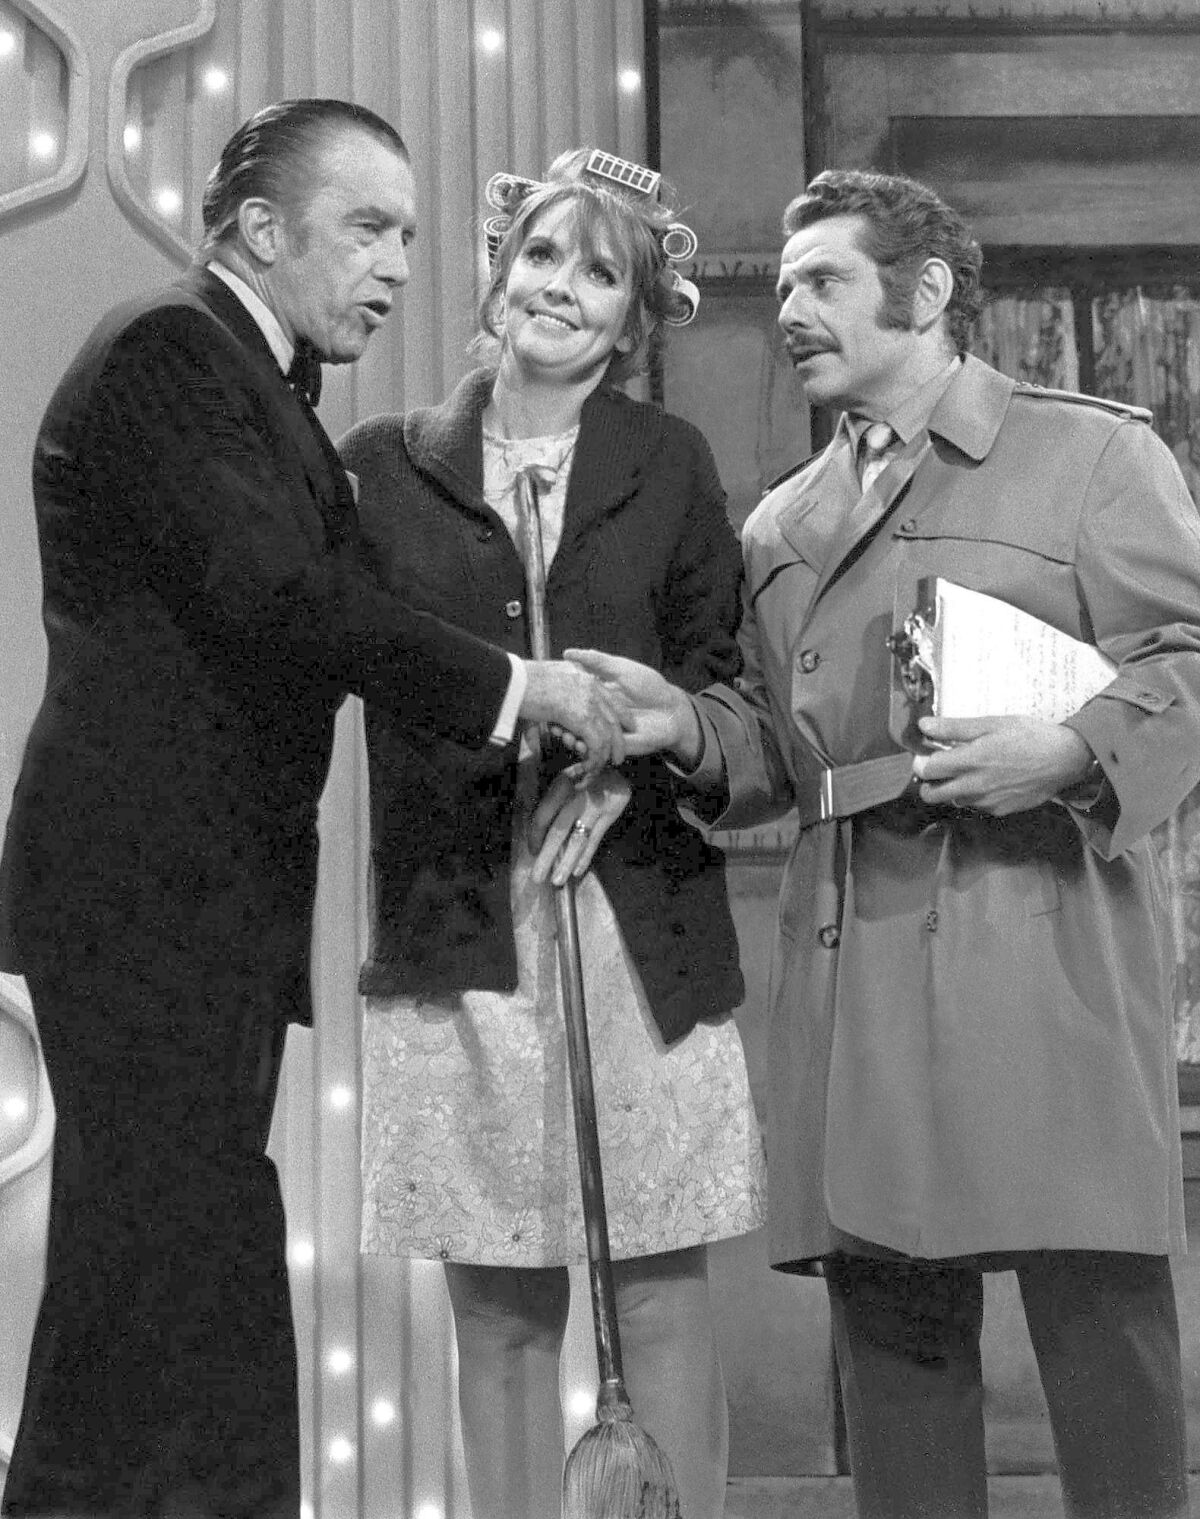 Jerry Stiller, right, and Anne Meara on "The Ed Sullivan Show" in 1970. Their numerous appearances on the program brought them fame and money but, as Meara told The Times in 2010, Sullivan terrified her.